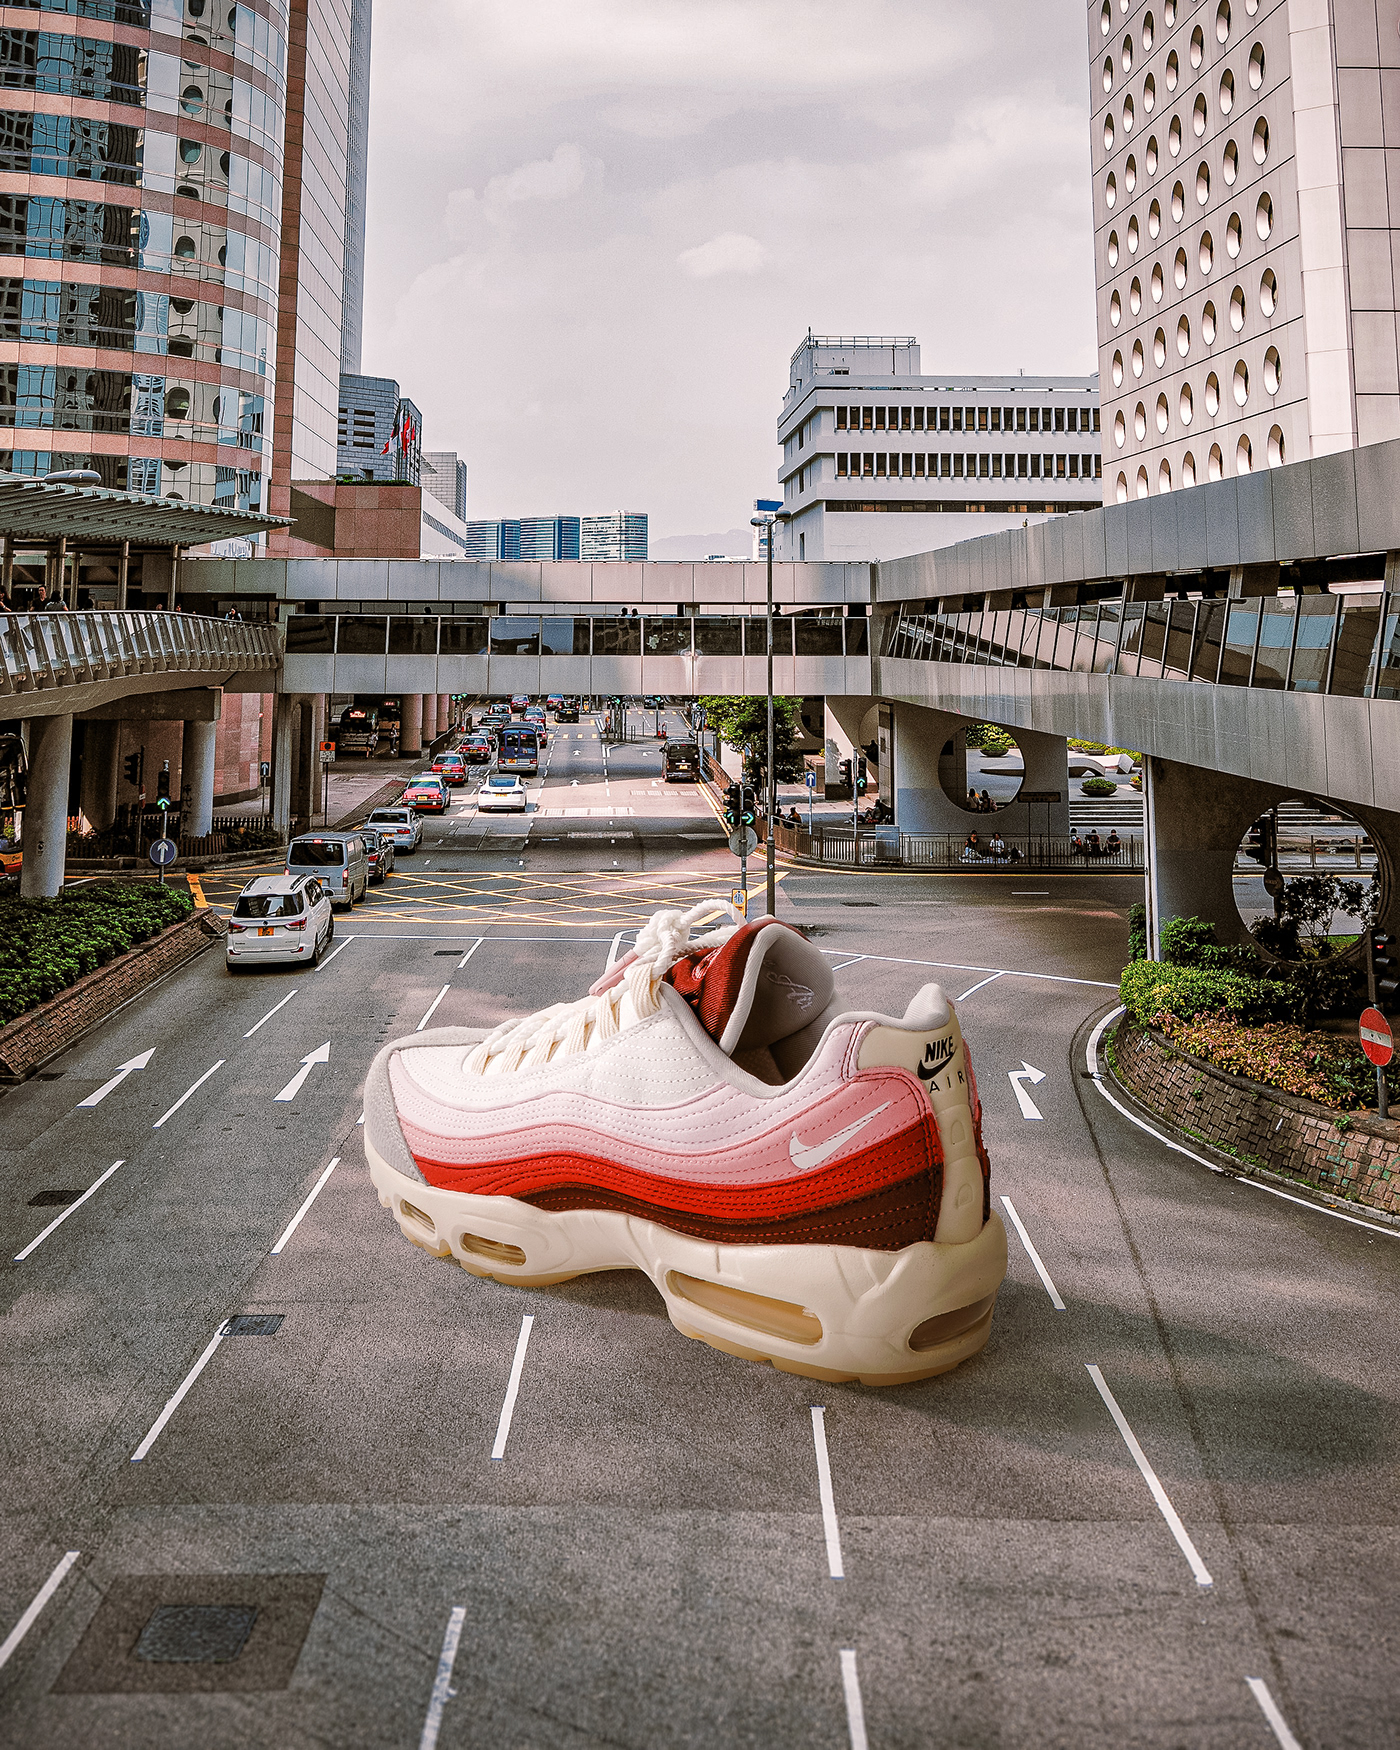 Photo composite of giant sneaker in the street. Retouching using Photoshop